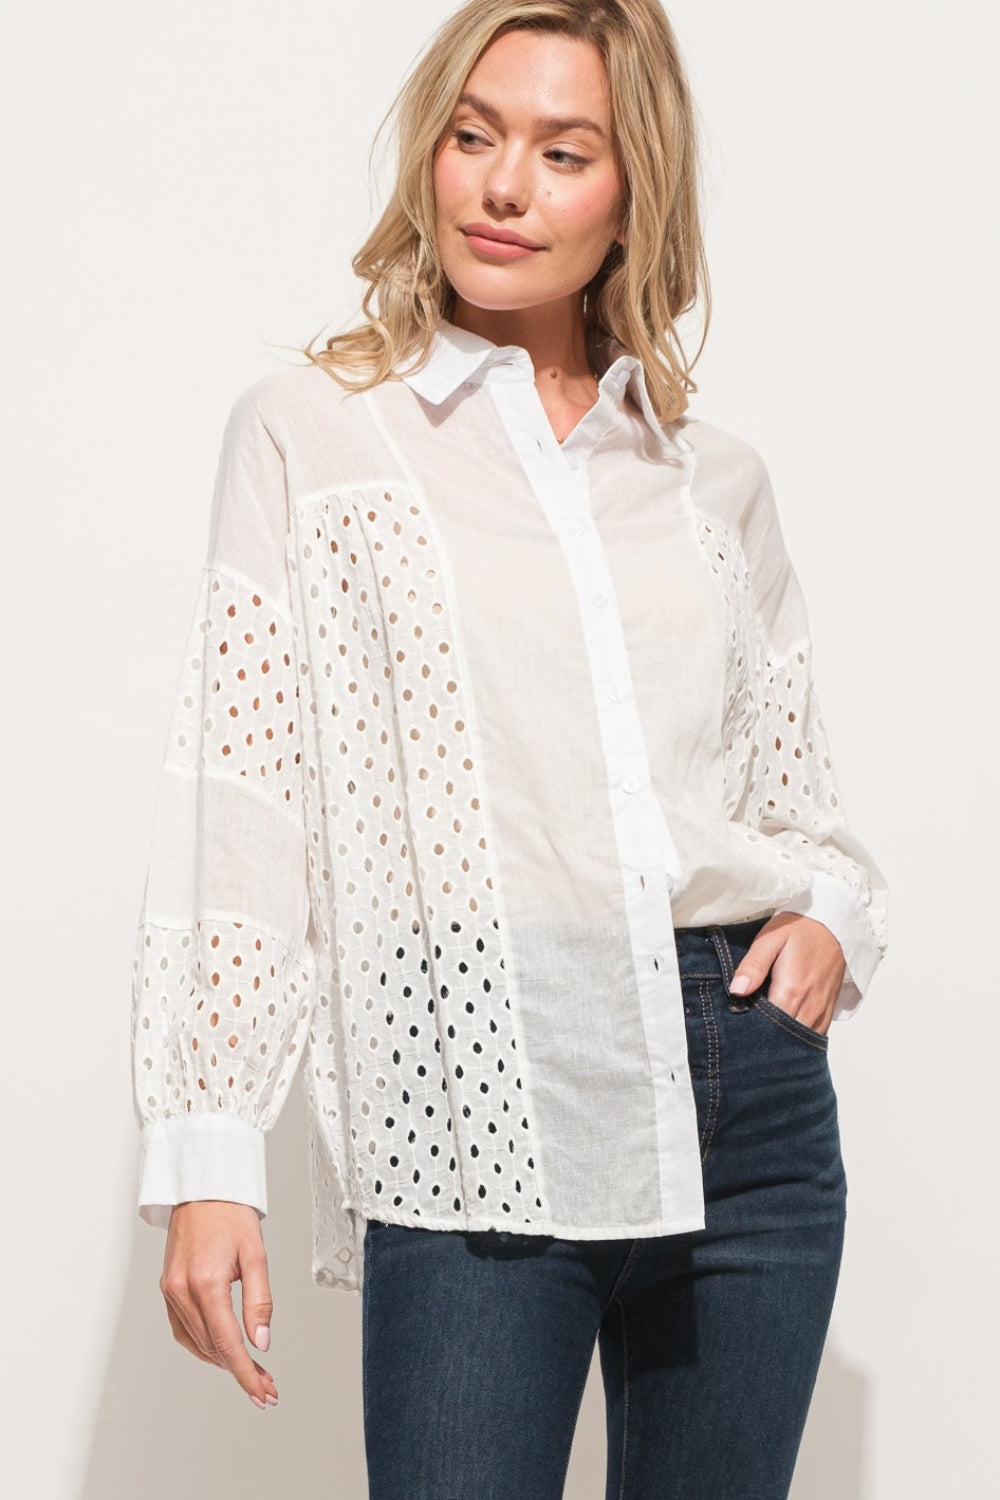 And The Why Eyelet Long Sleeve Button Down Shirt - bertofonsi